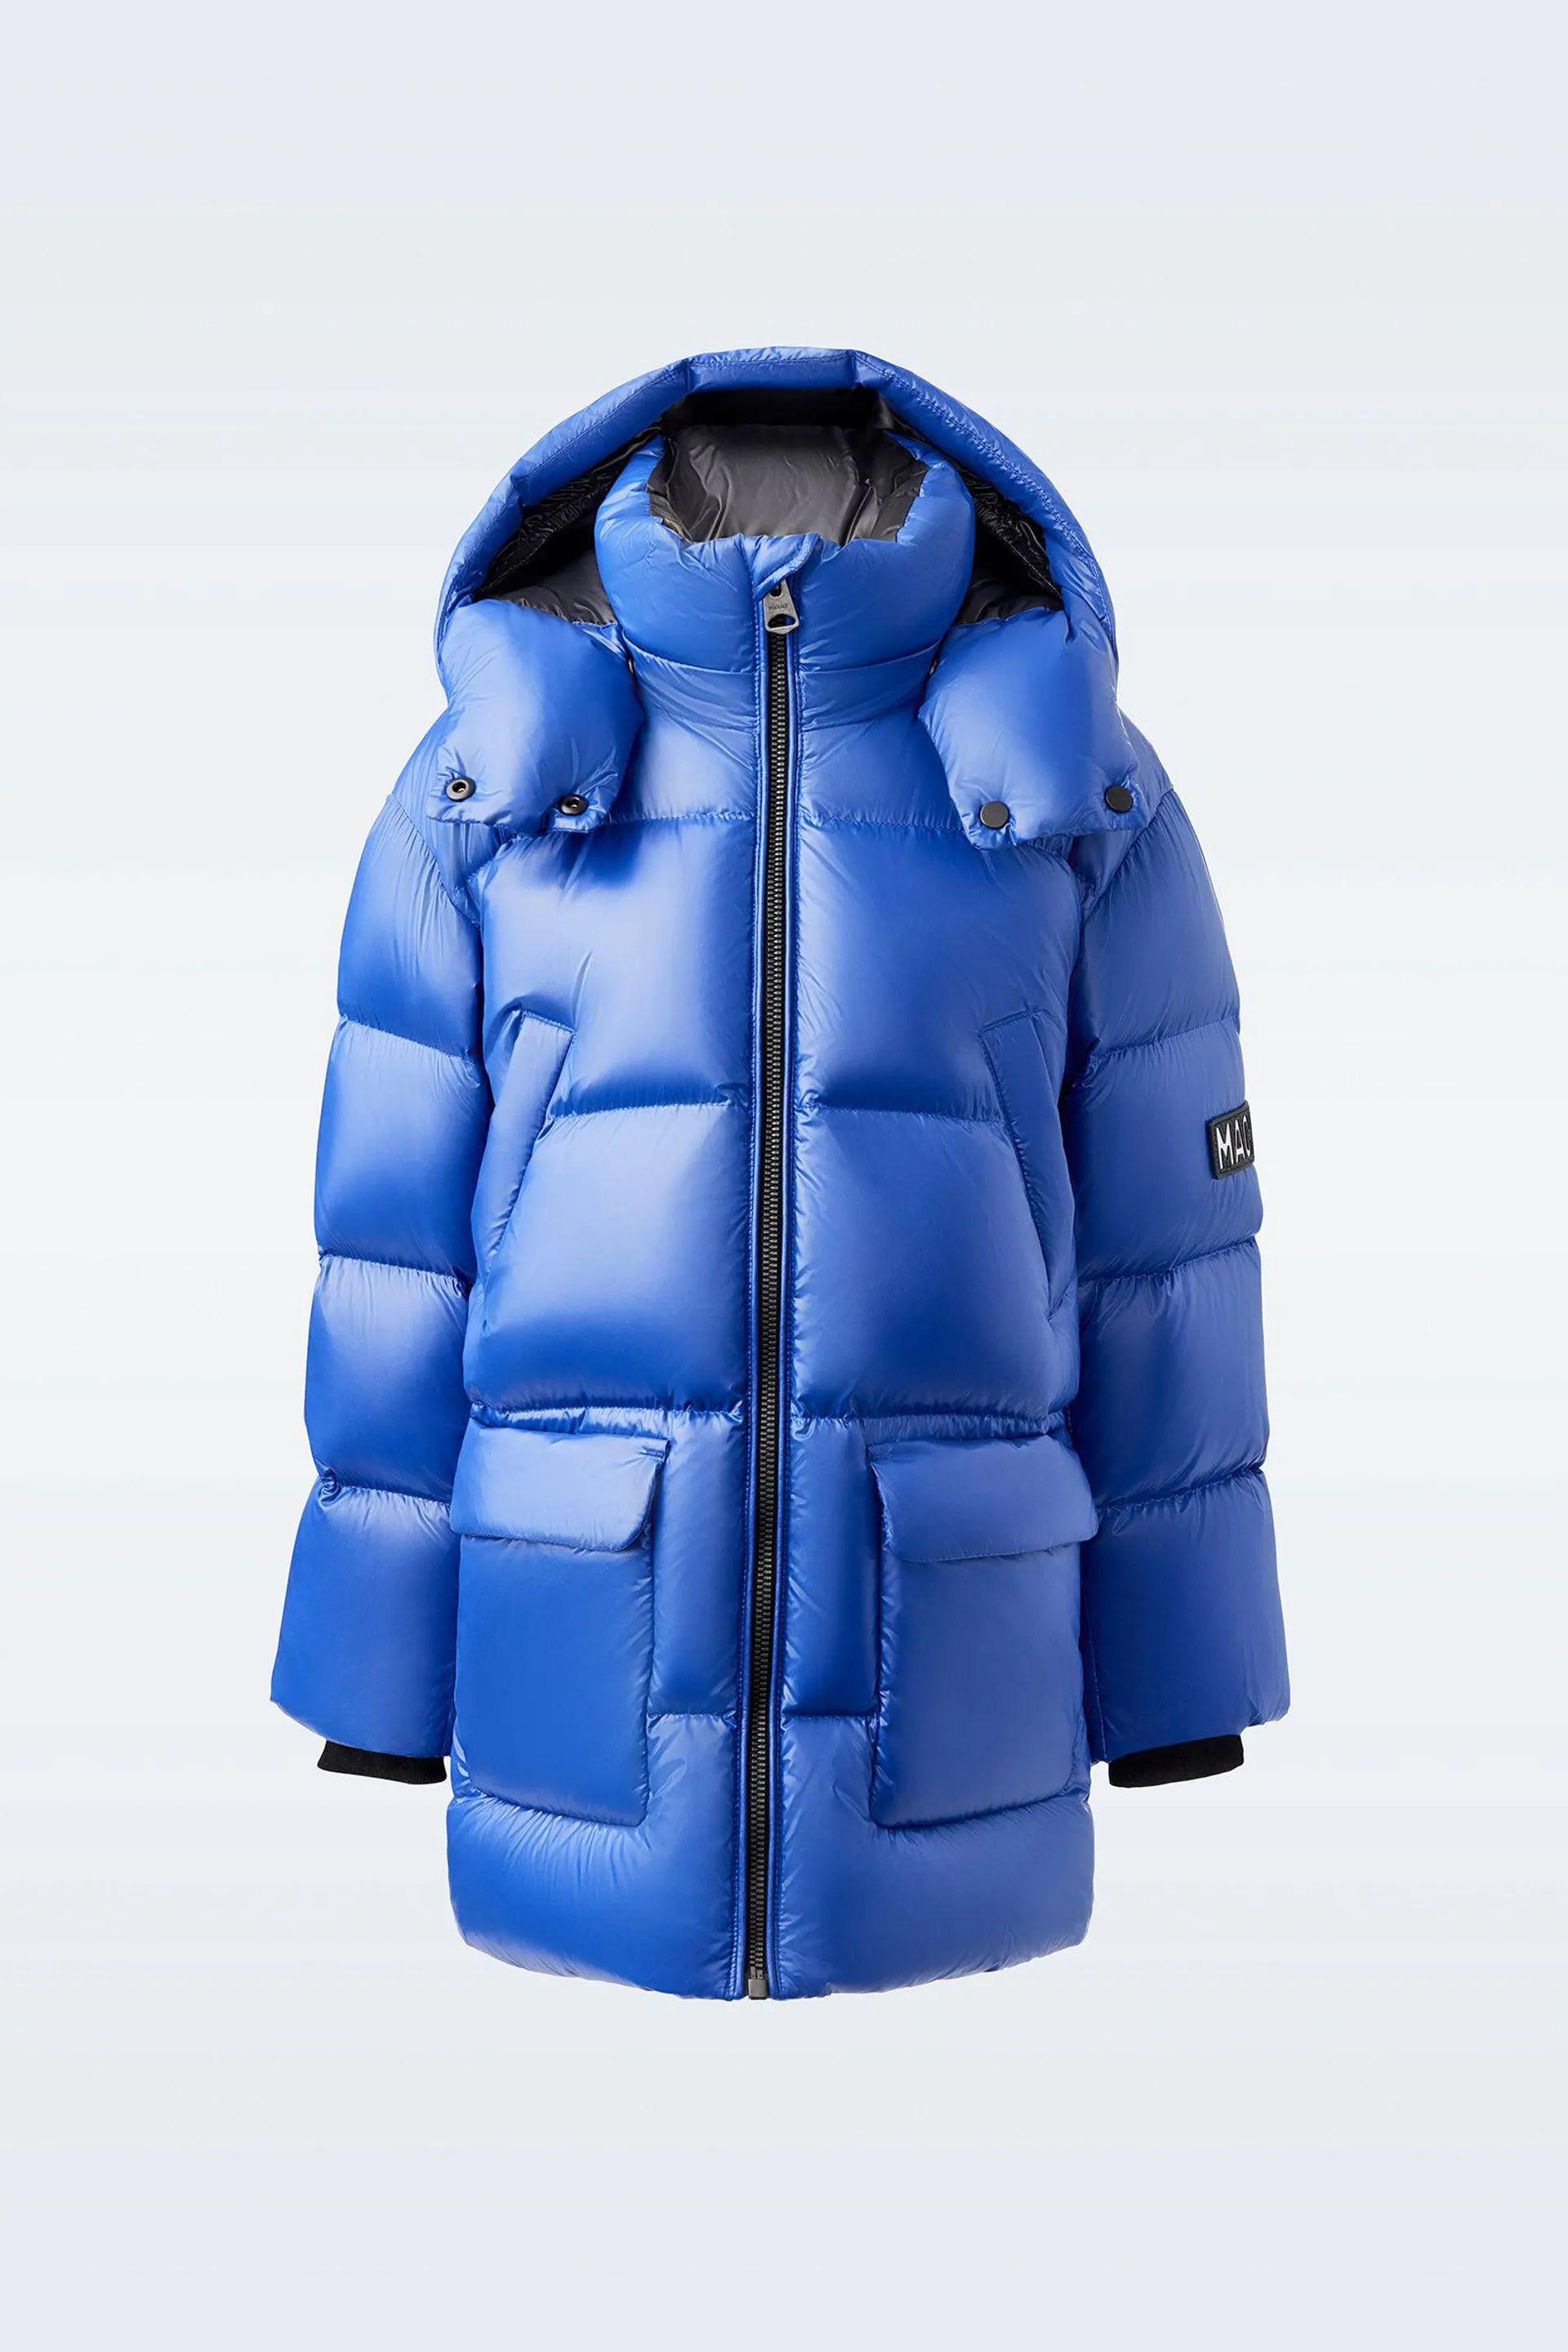 KENNIE Lustrous light down parka with hood for kids (8-14 years)